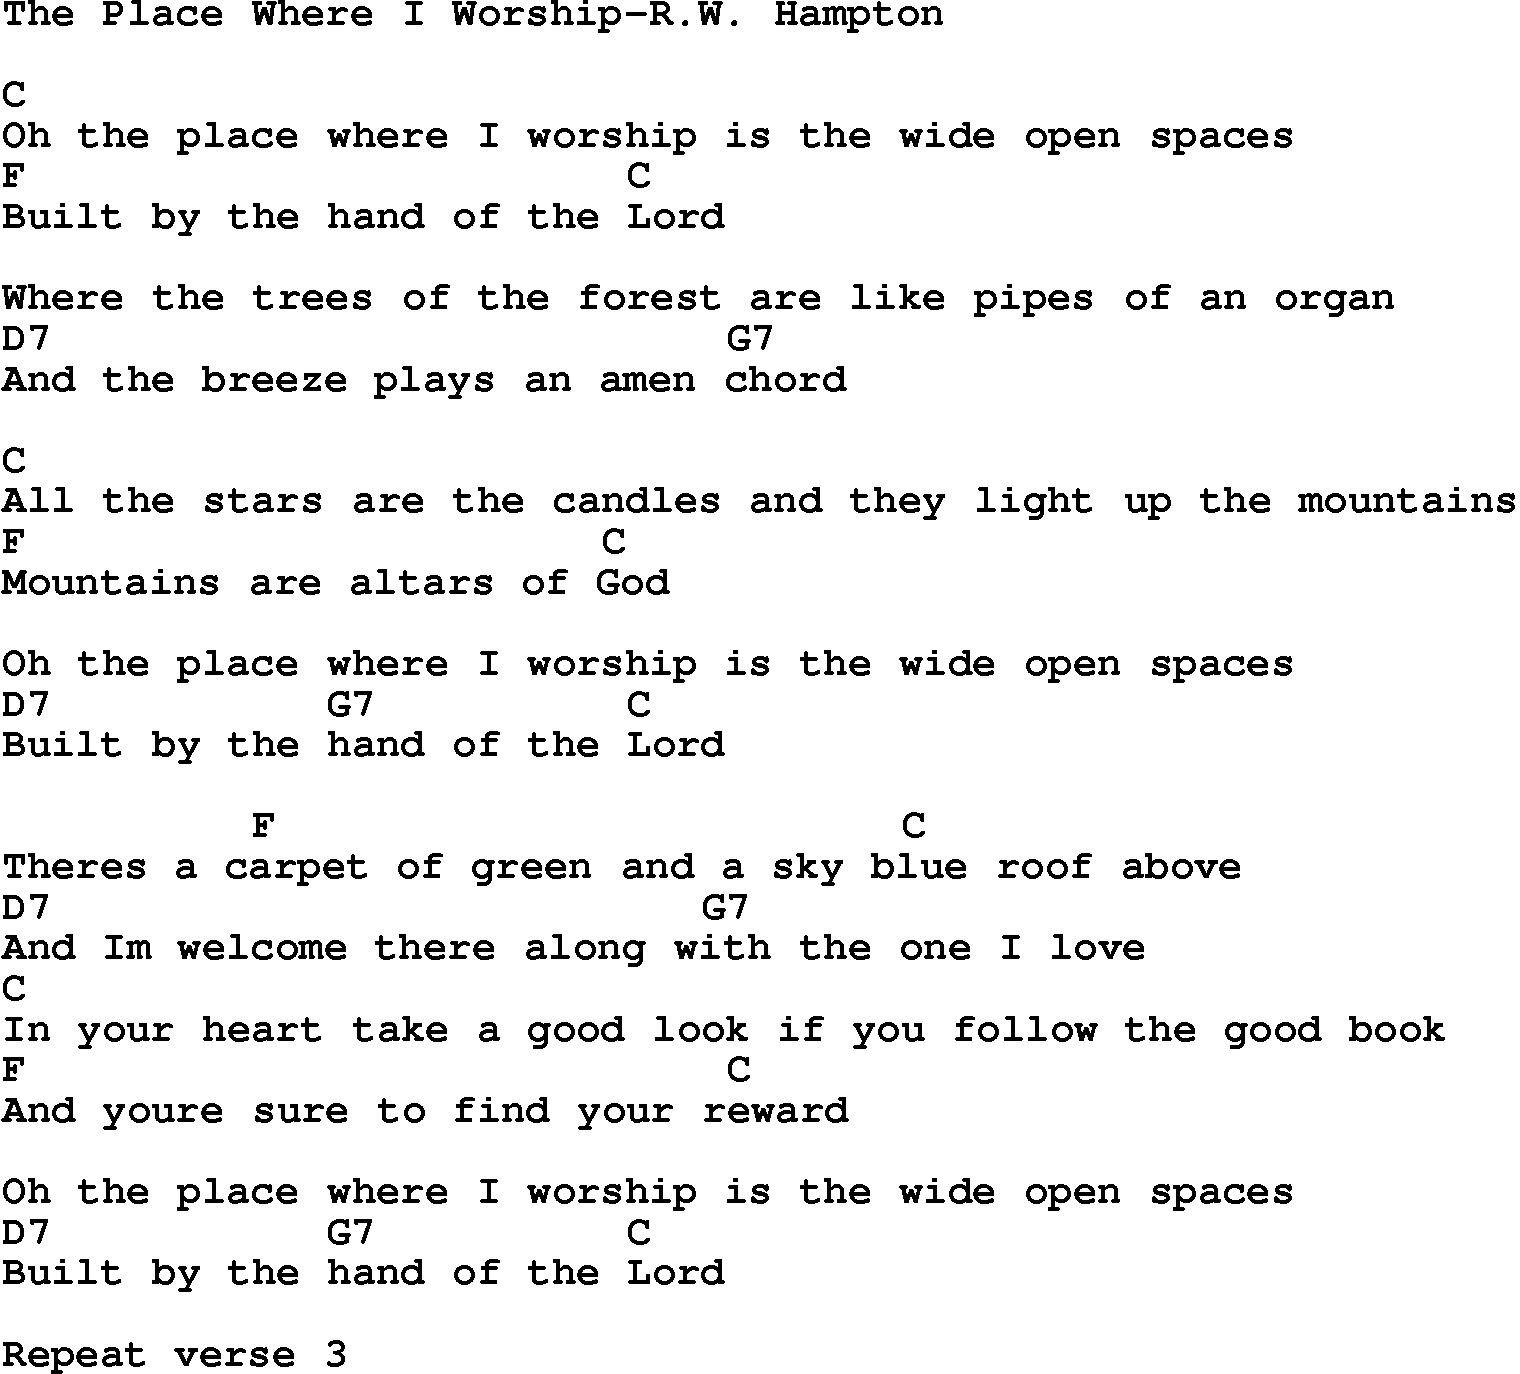 Country, Southern and Bluegrass Gospel Song The Place Where I Worship-R W Hampton lyrics and chords